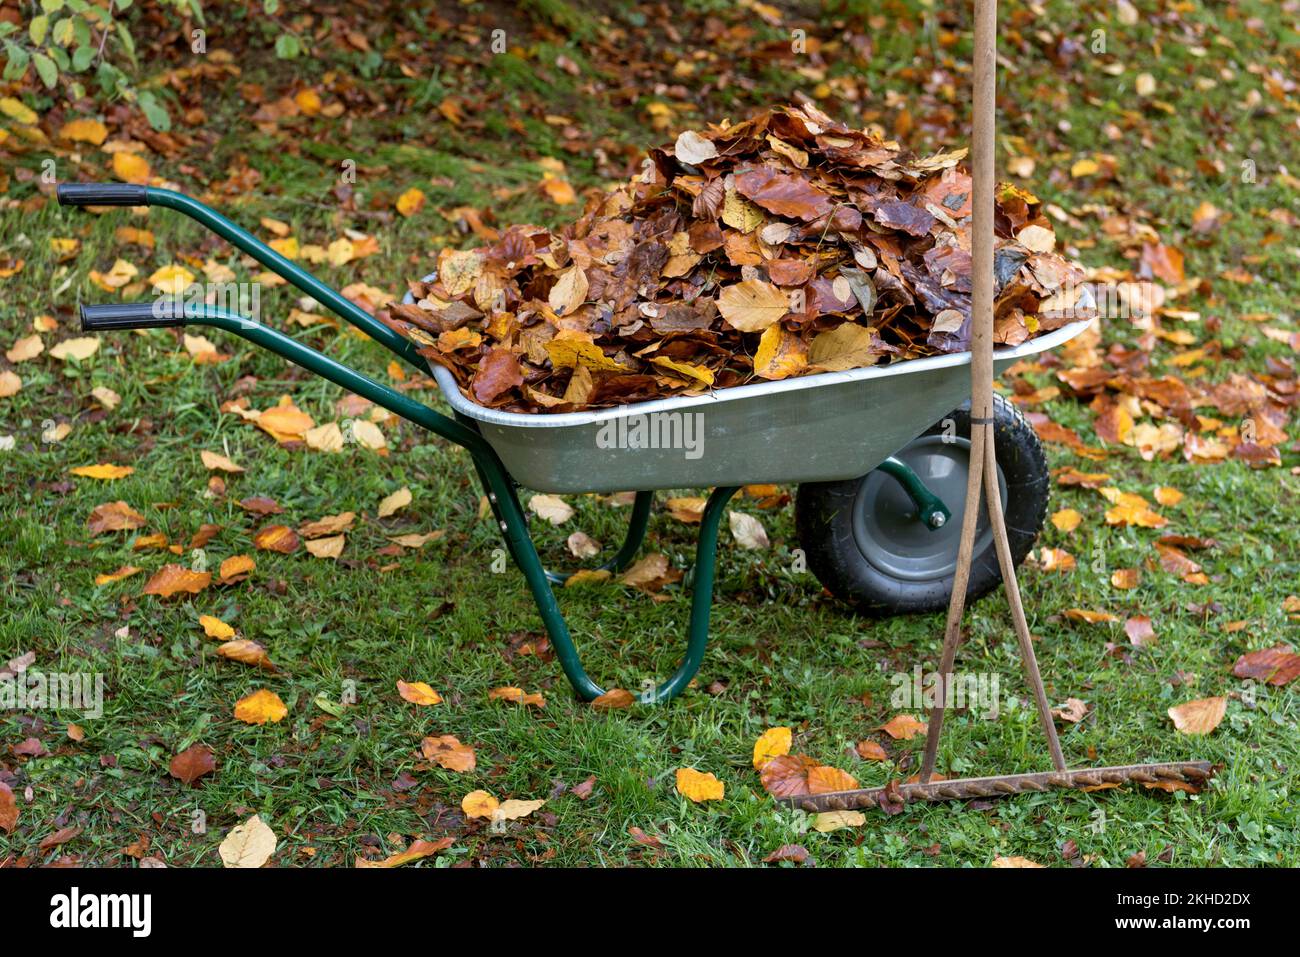 Autumn leaves in wheelbarrow with old rake in garden, hay rake with wooden tines, autumn coloured leaves, foliage, Germany, Europe Stock Photo